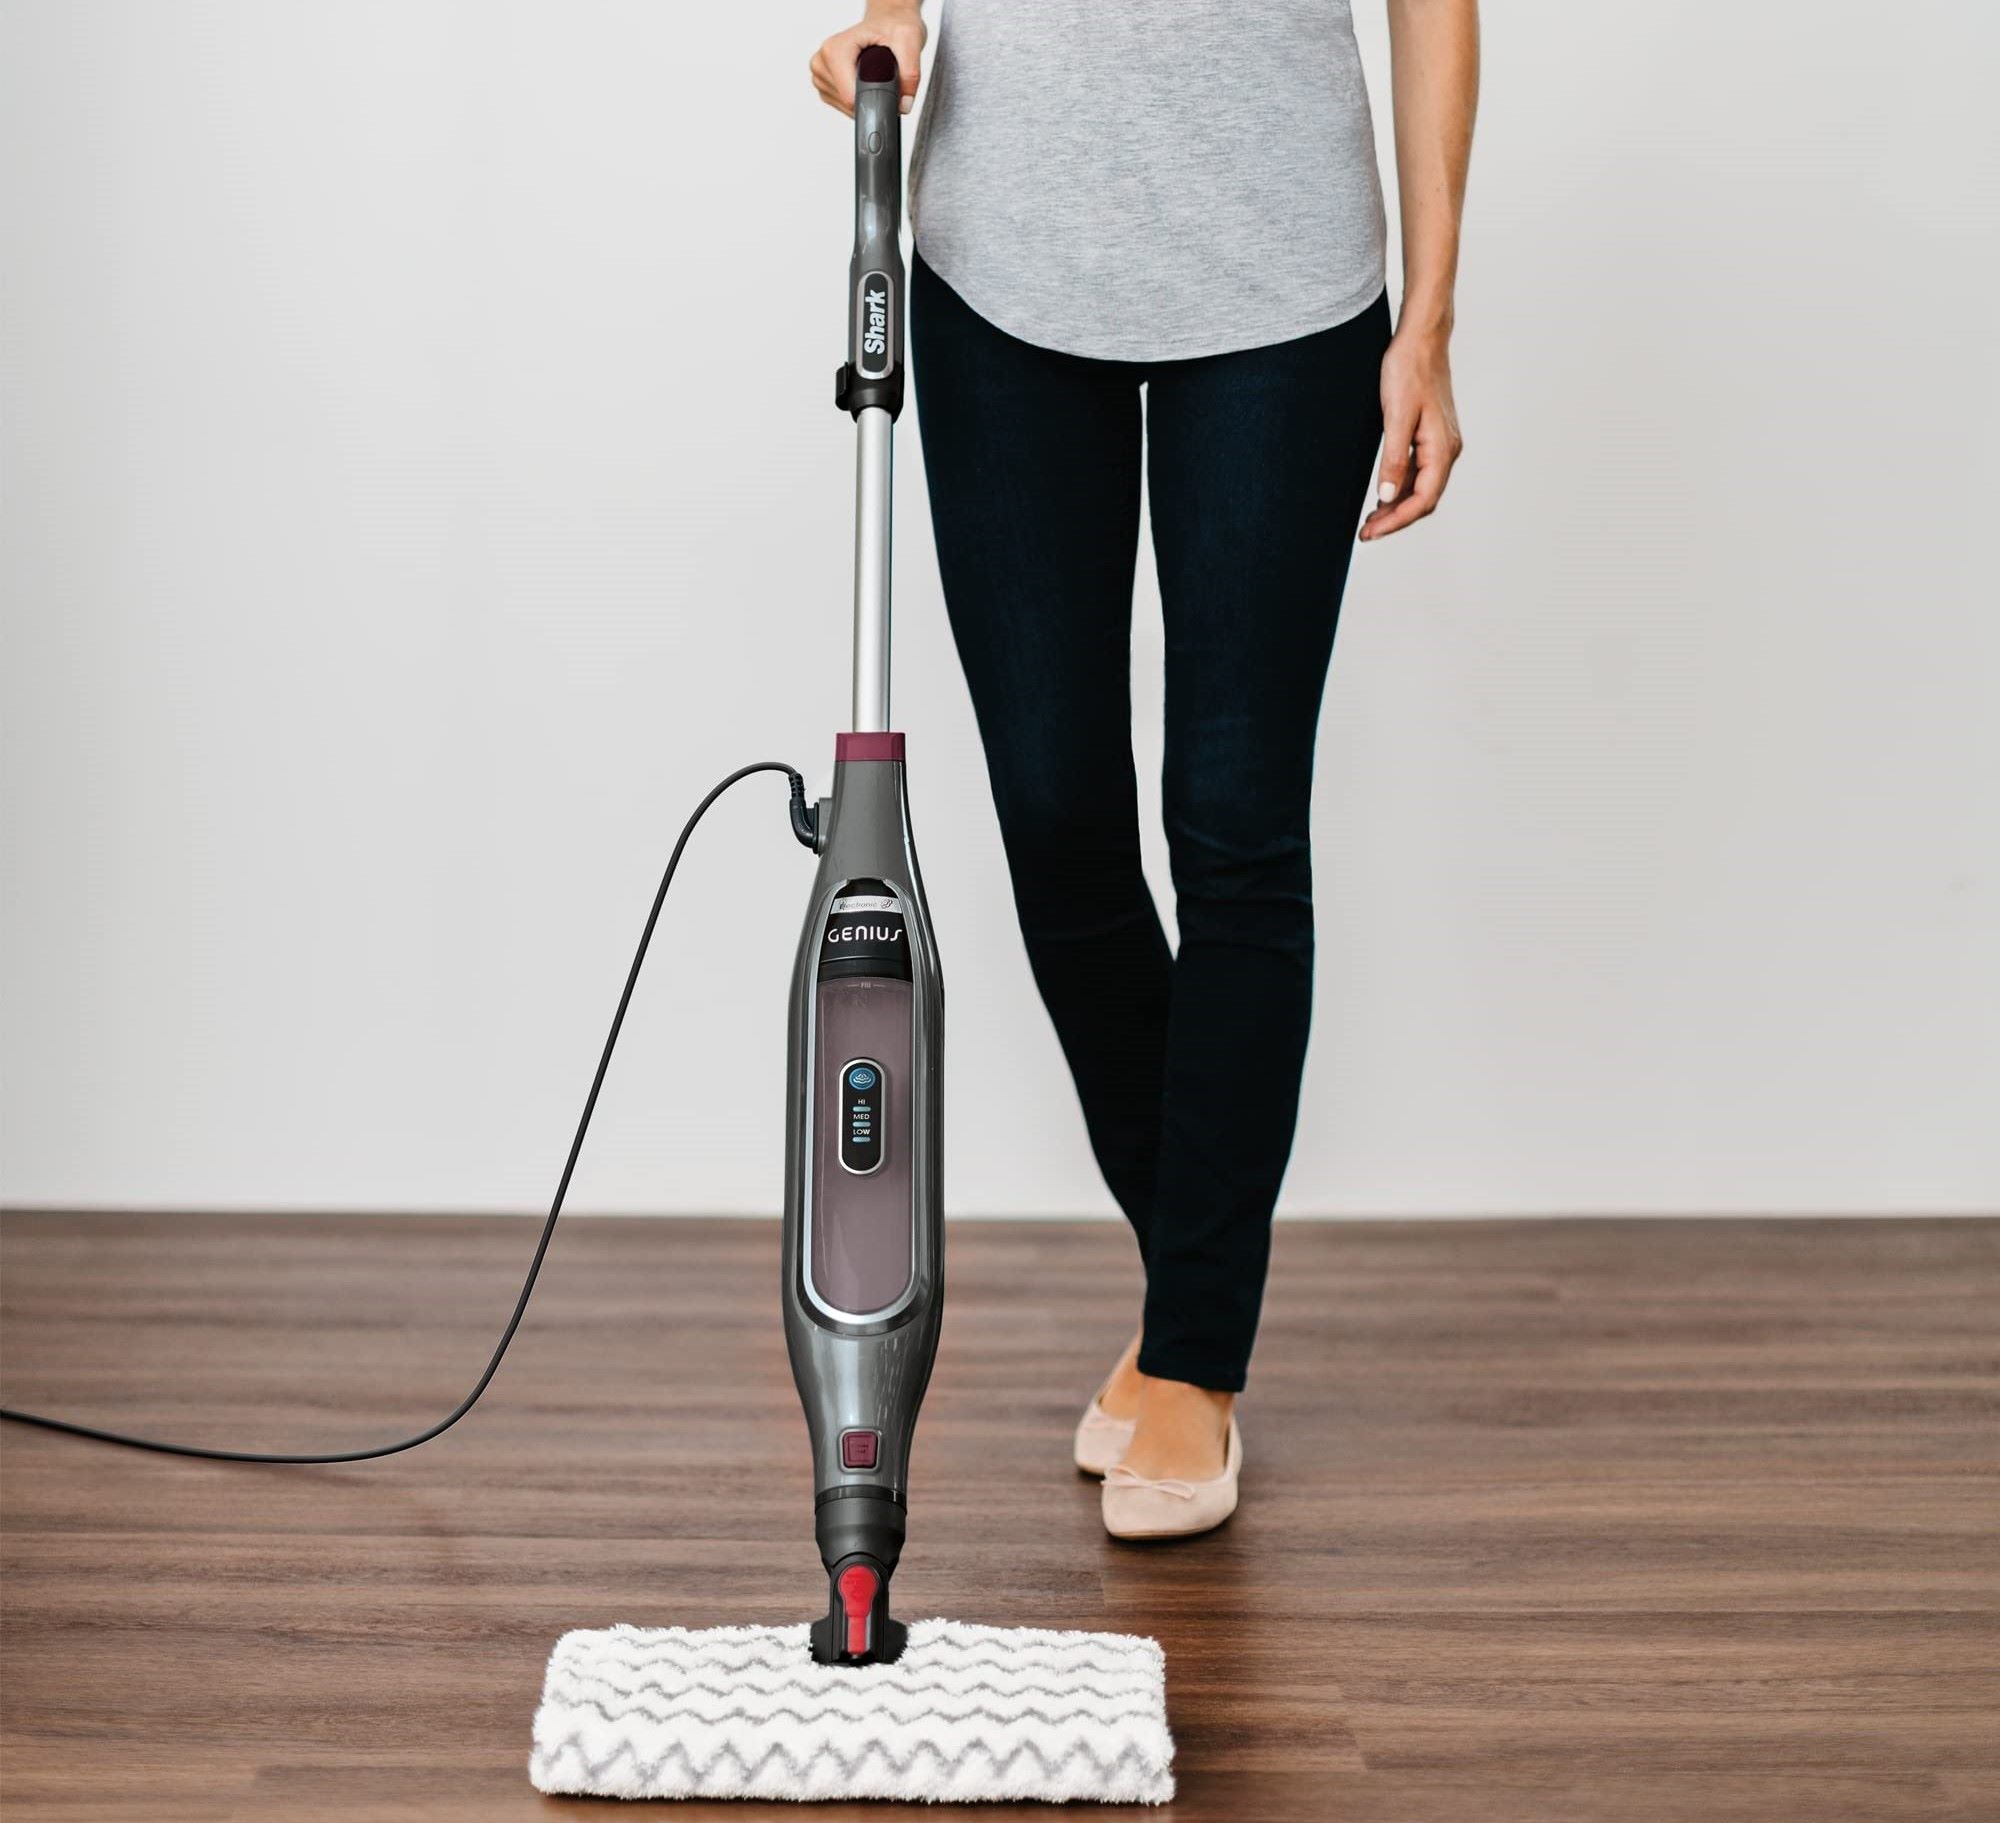 How To Use A Shark Genius Steam Mop